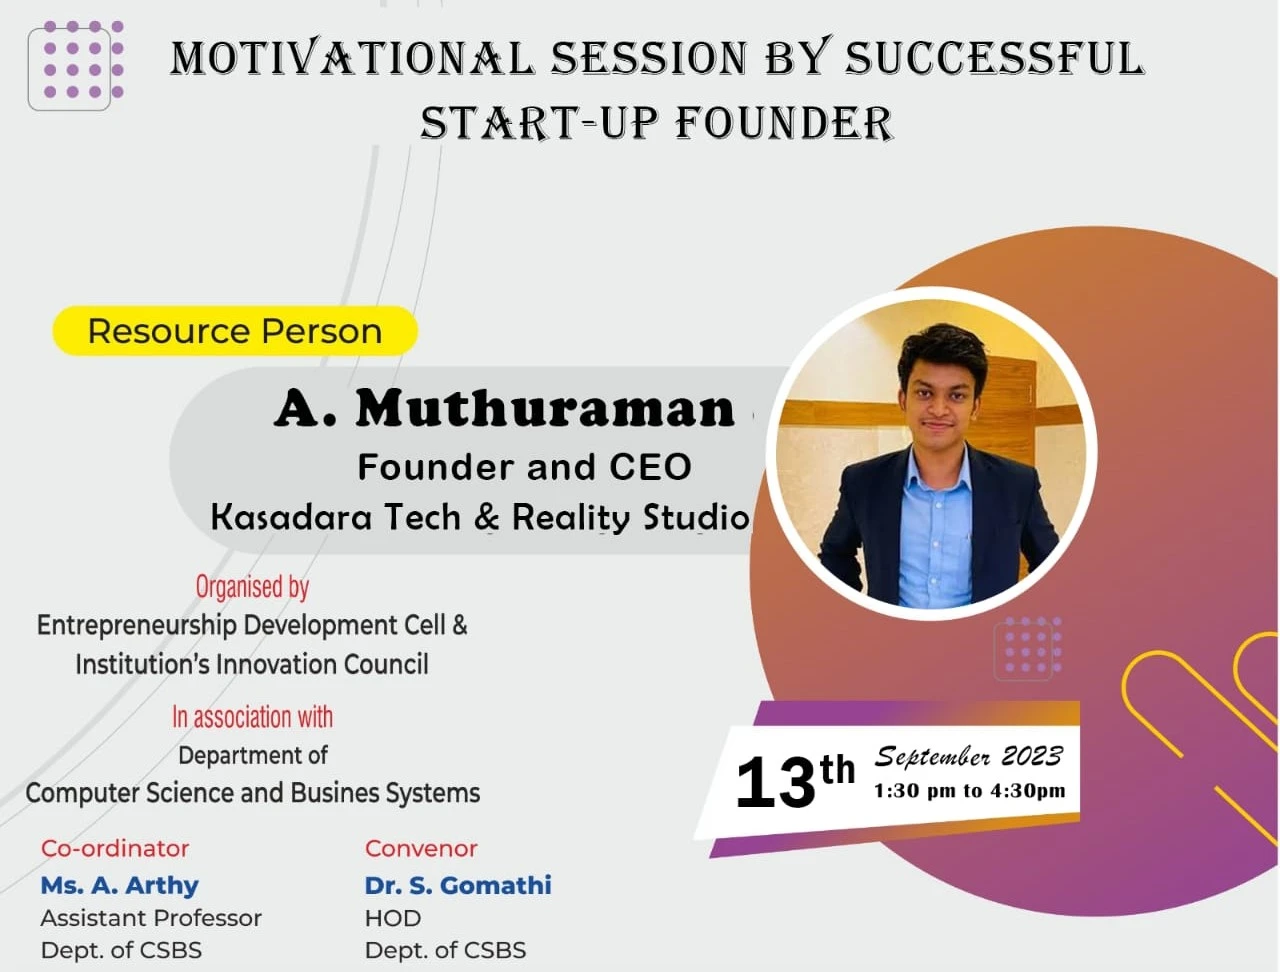 MOTIVATIONAL SESSION BY SUCCESSFUL START-UP FOUNDER